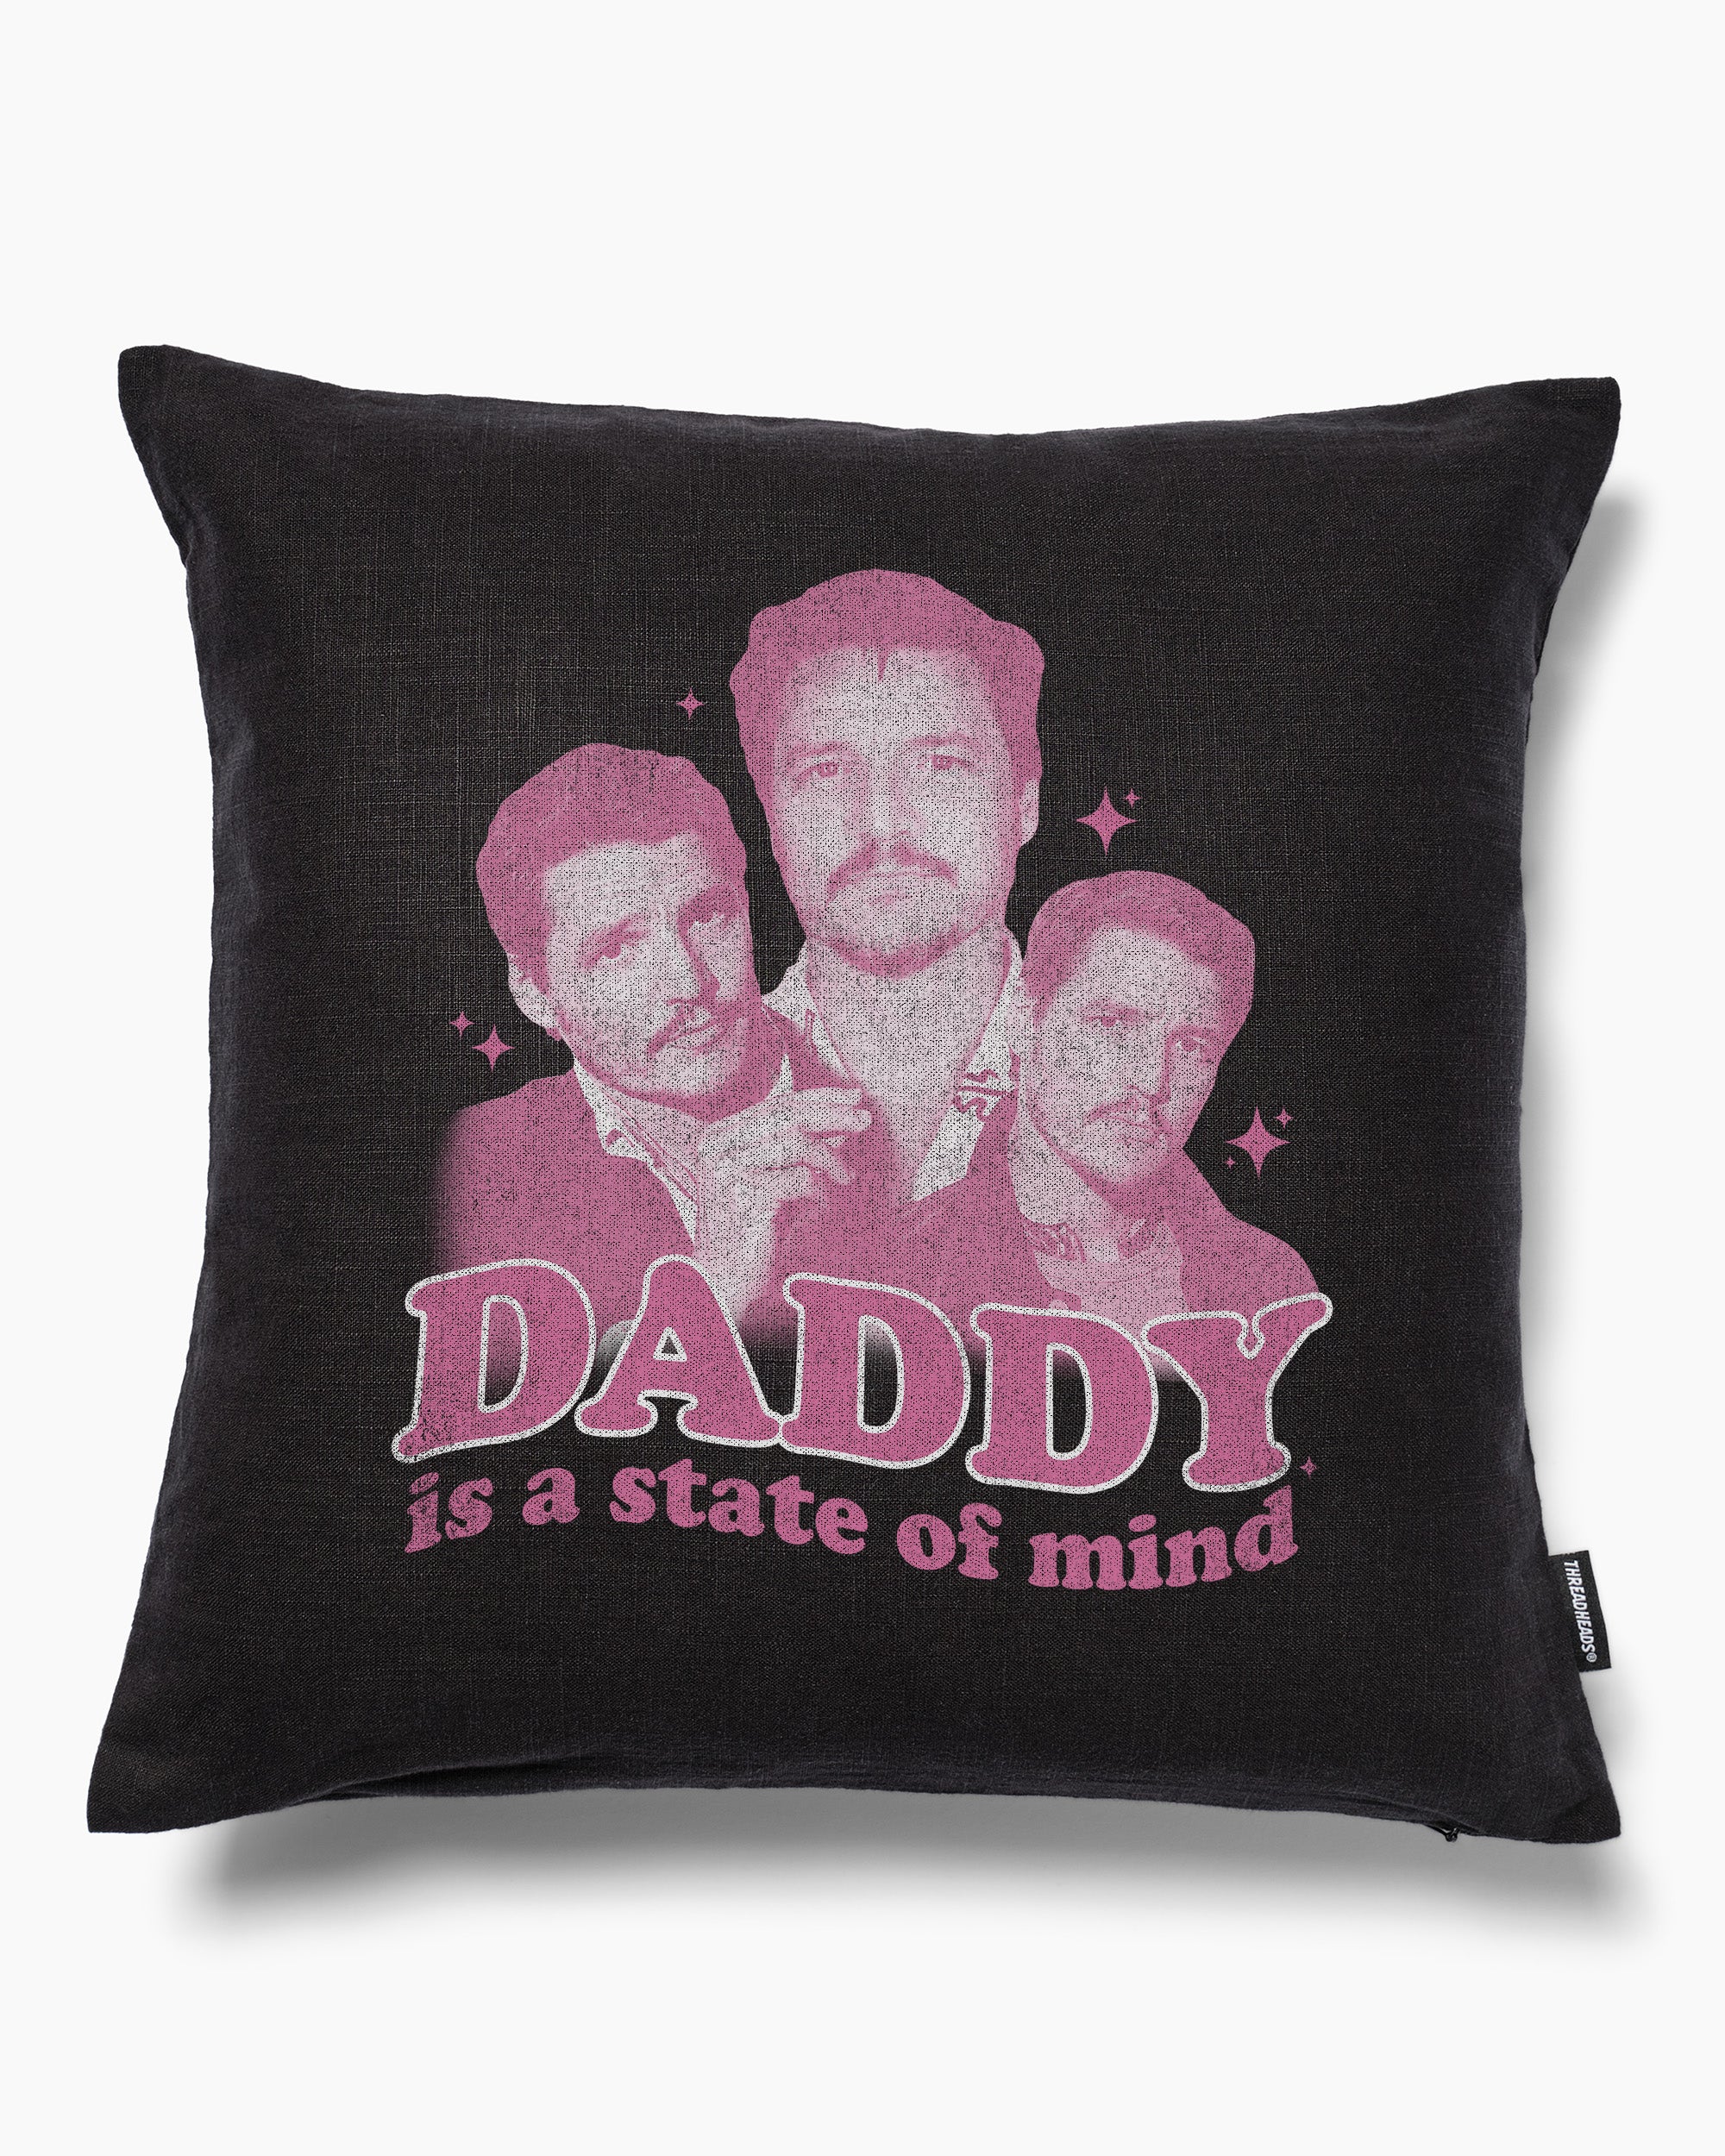 Daddy Is a State of Mind Cushion